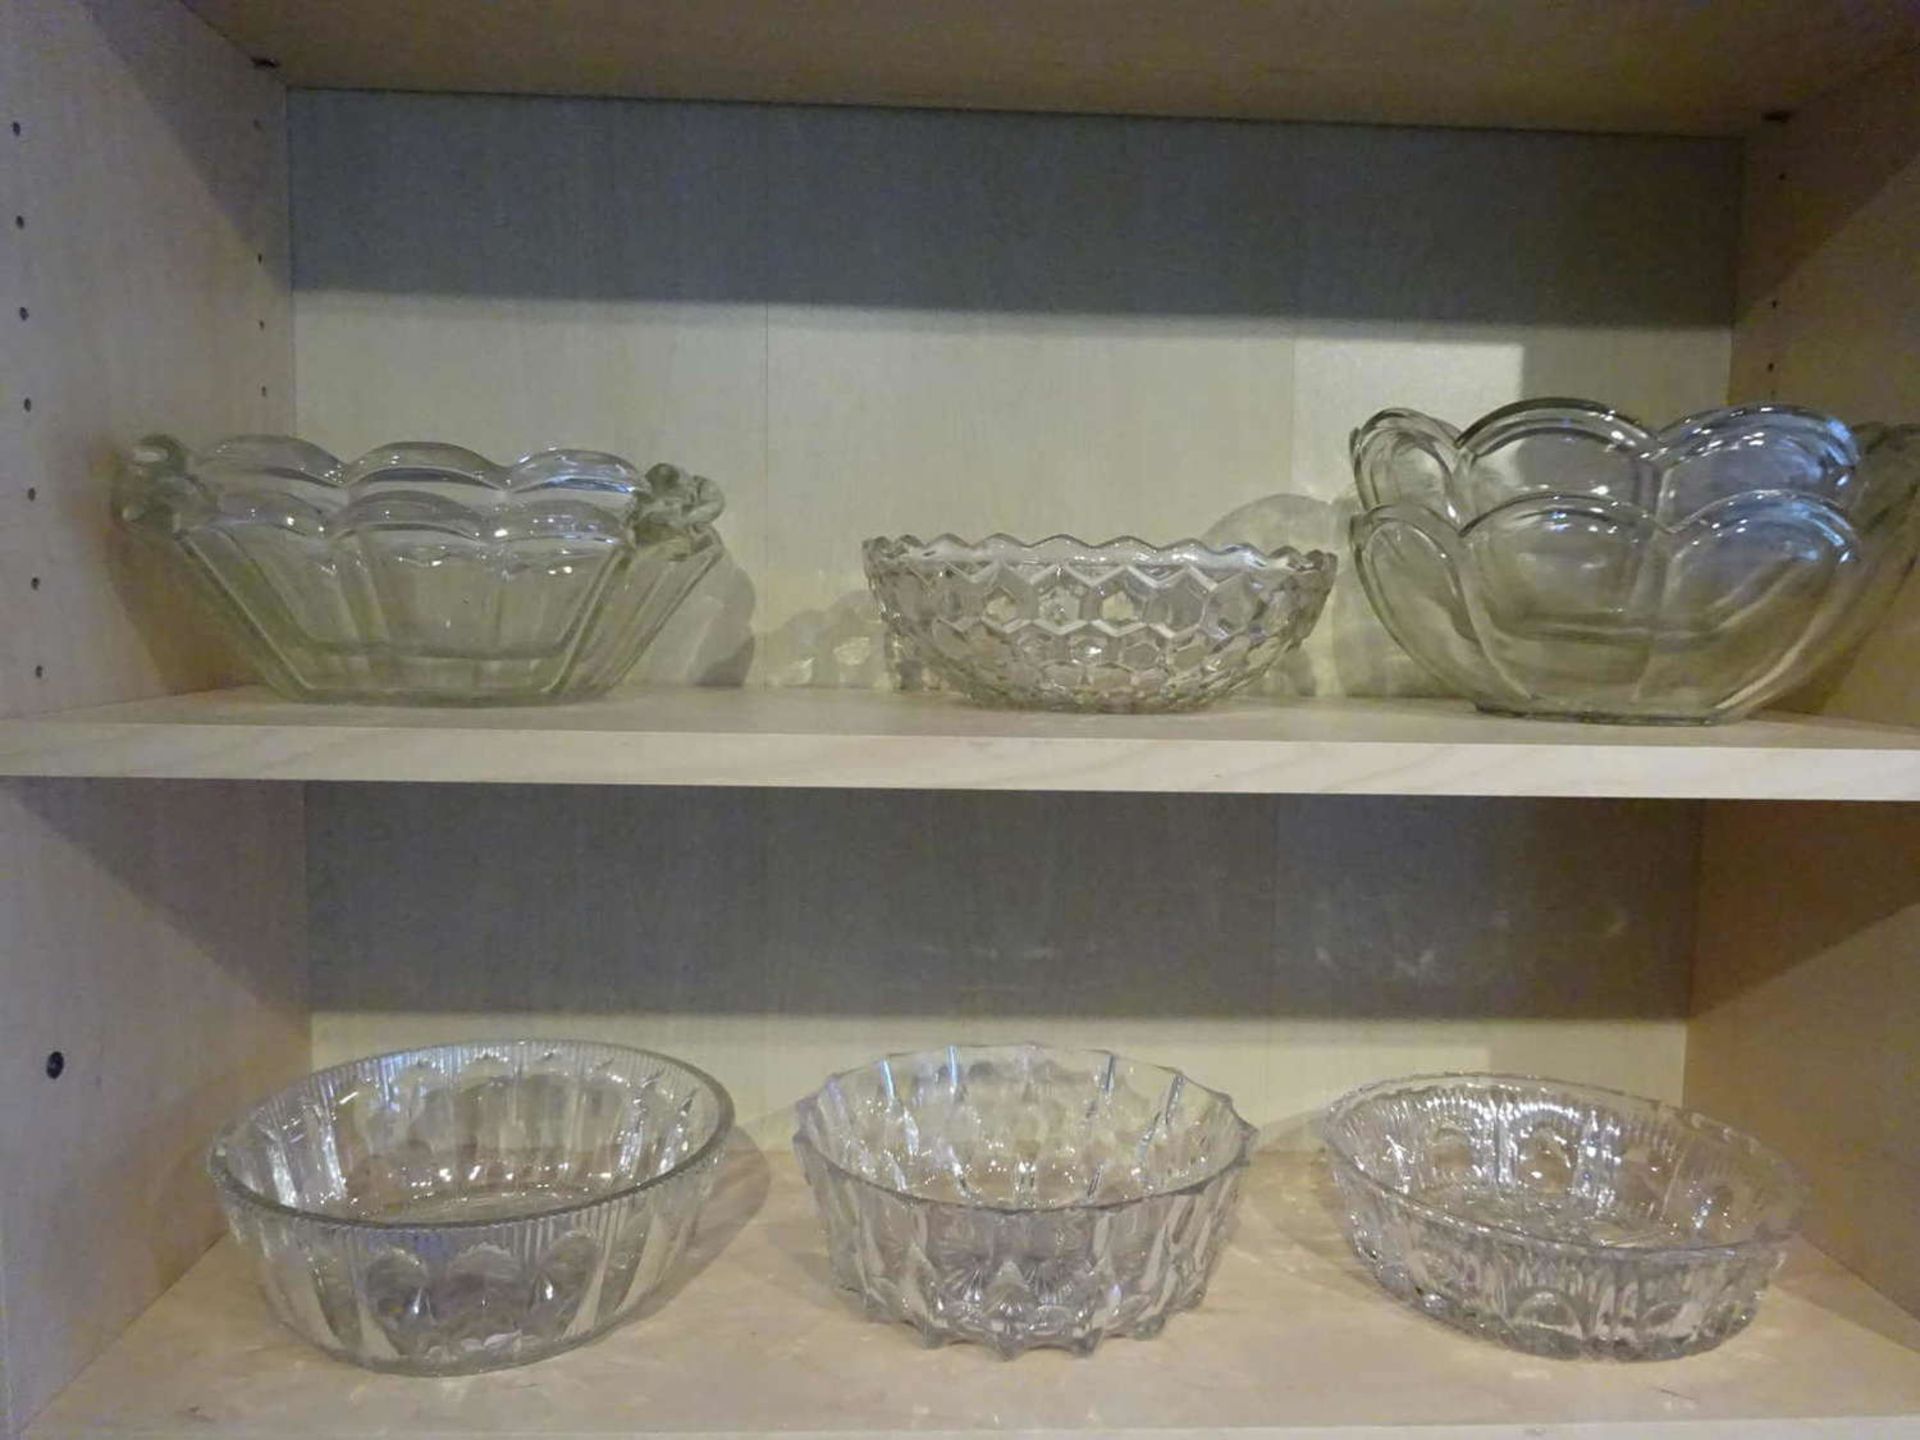 Lot glass bowls from household dissolution, 8 pieces, used condition.